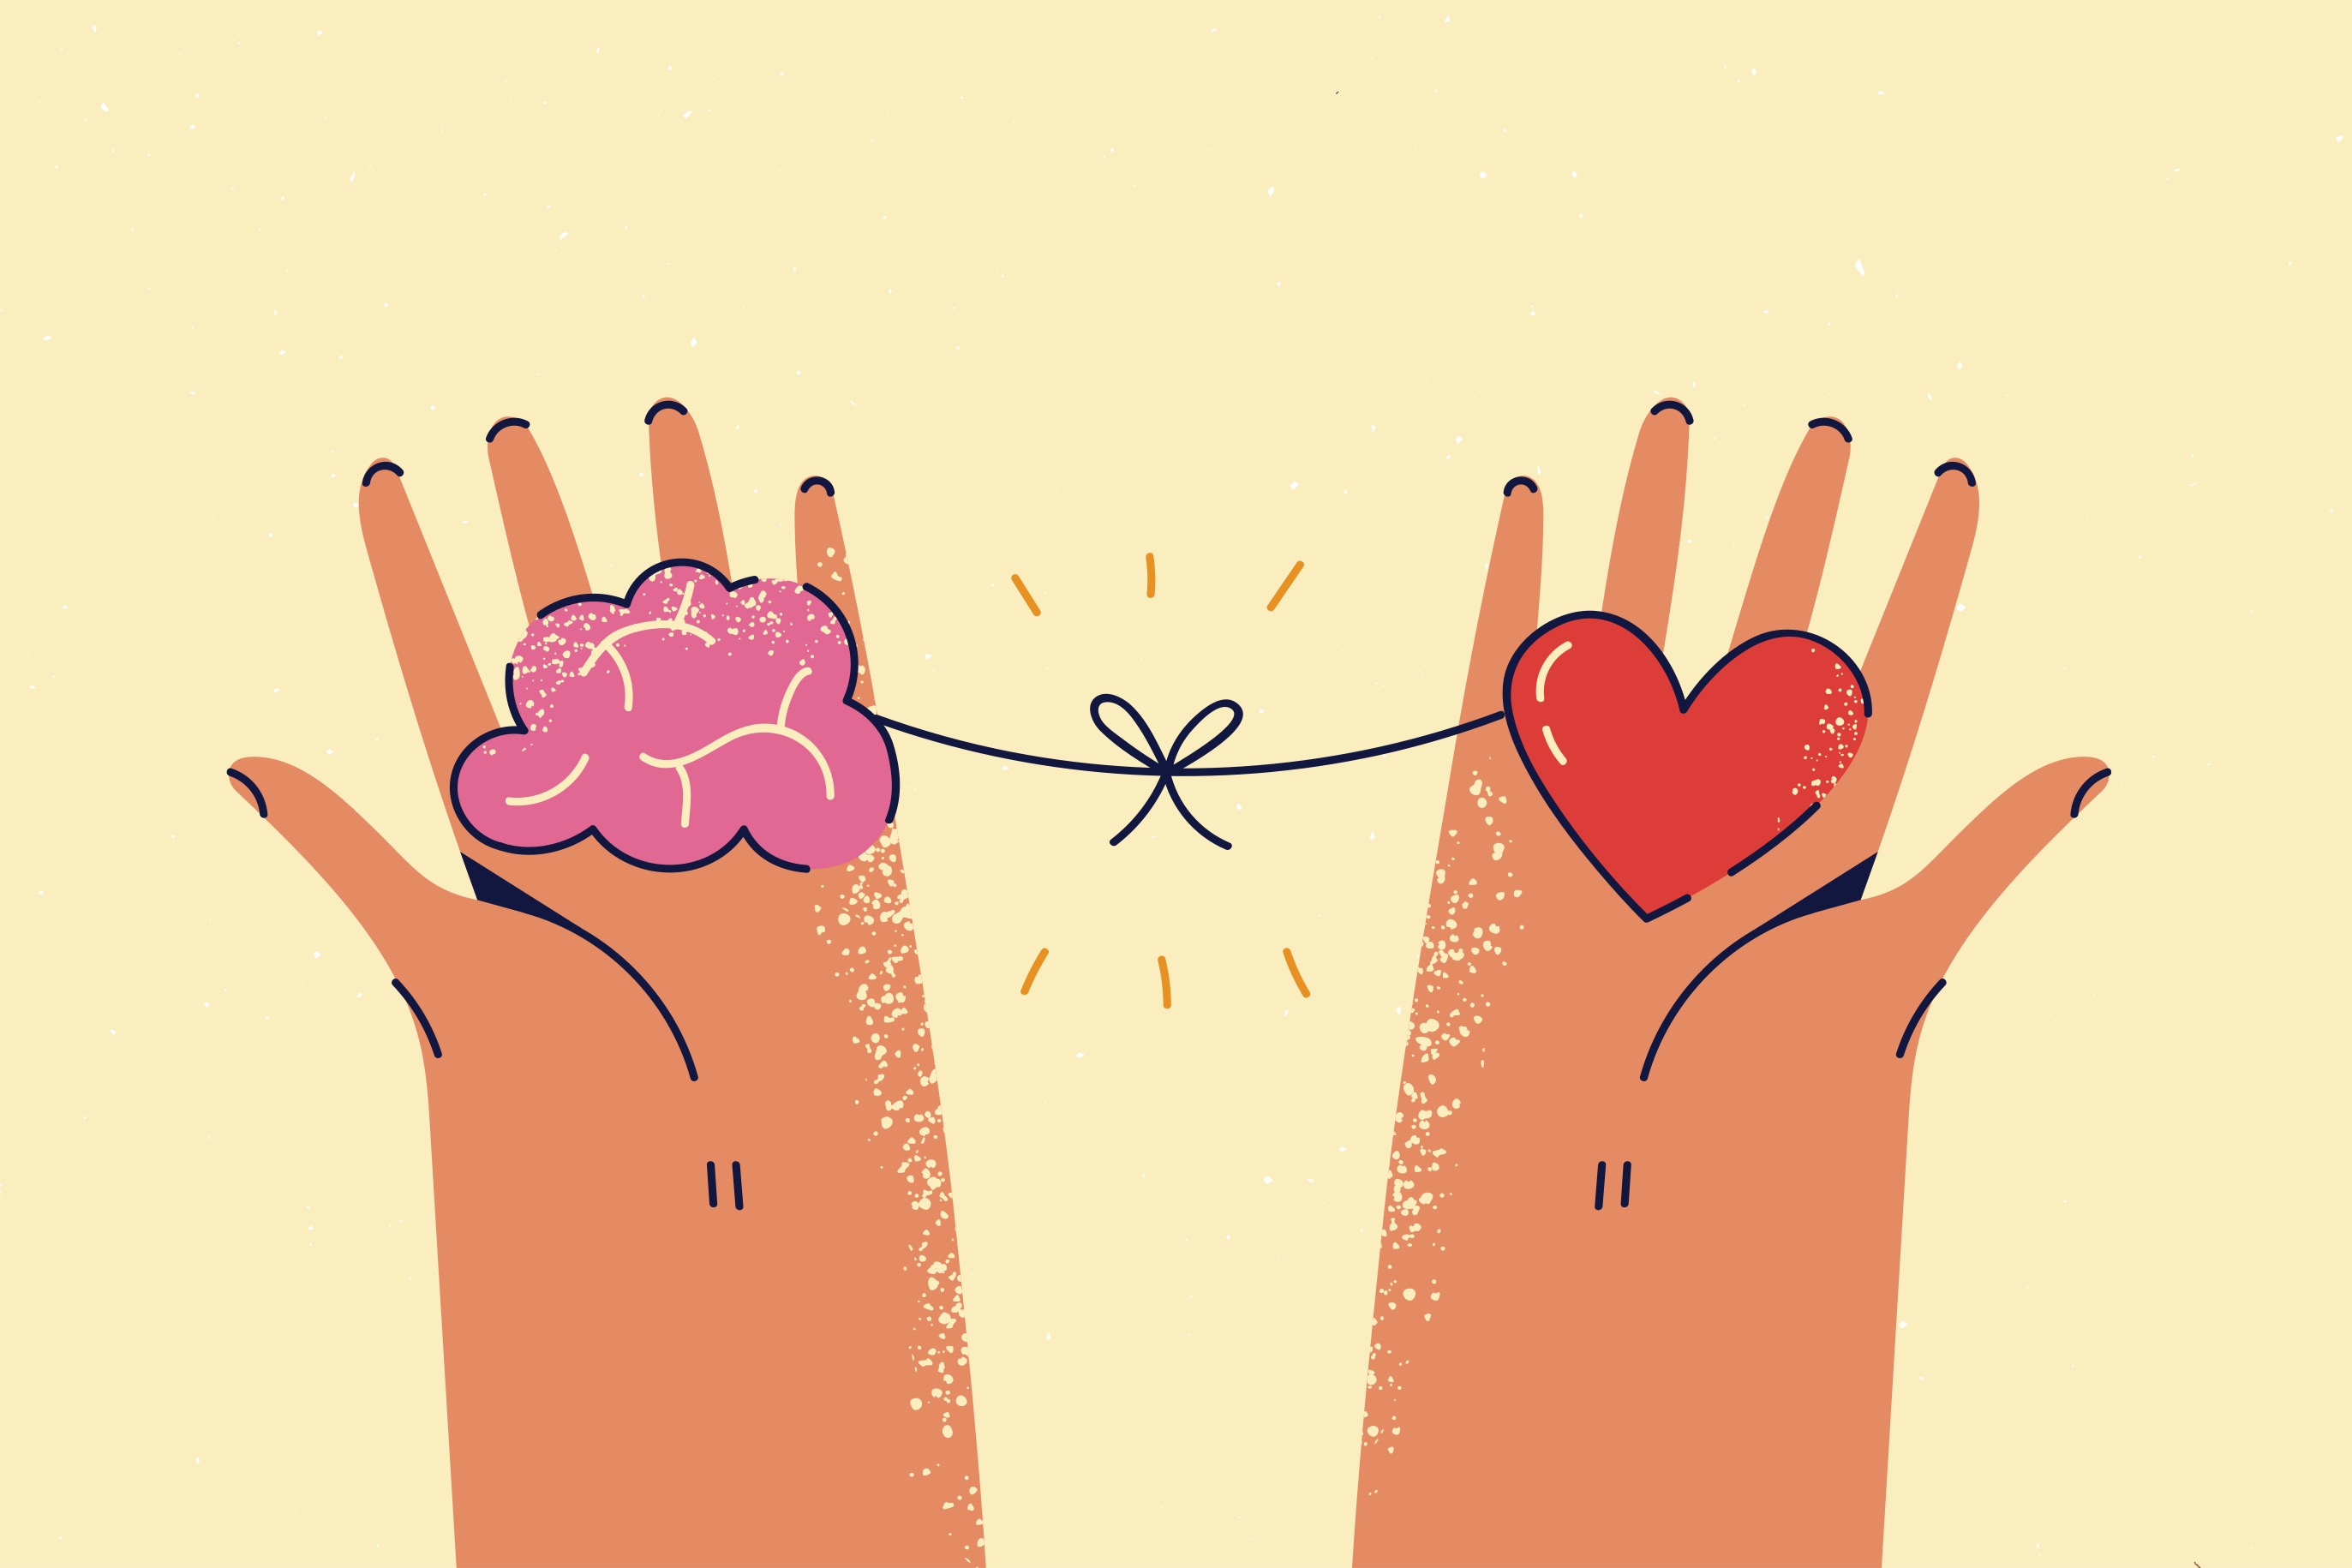 An illustration of two orange hands against a yellow background. The left hand holds a brain, the right hand holds a heart.